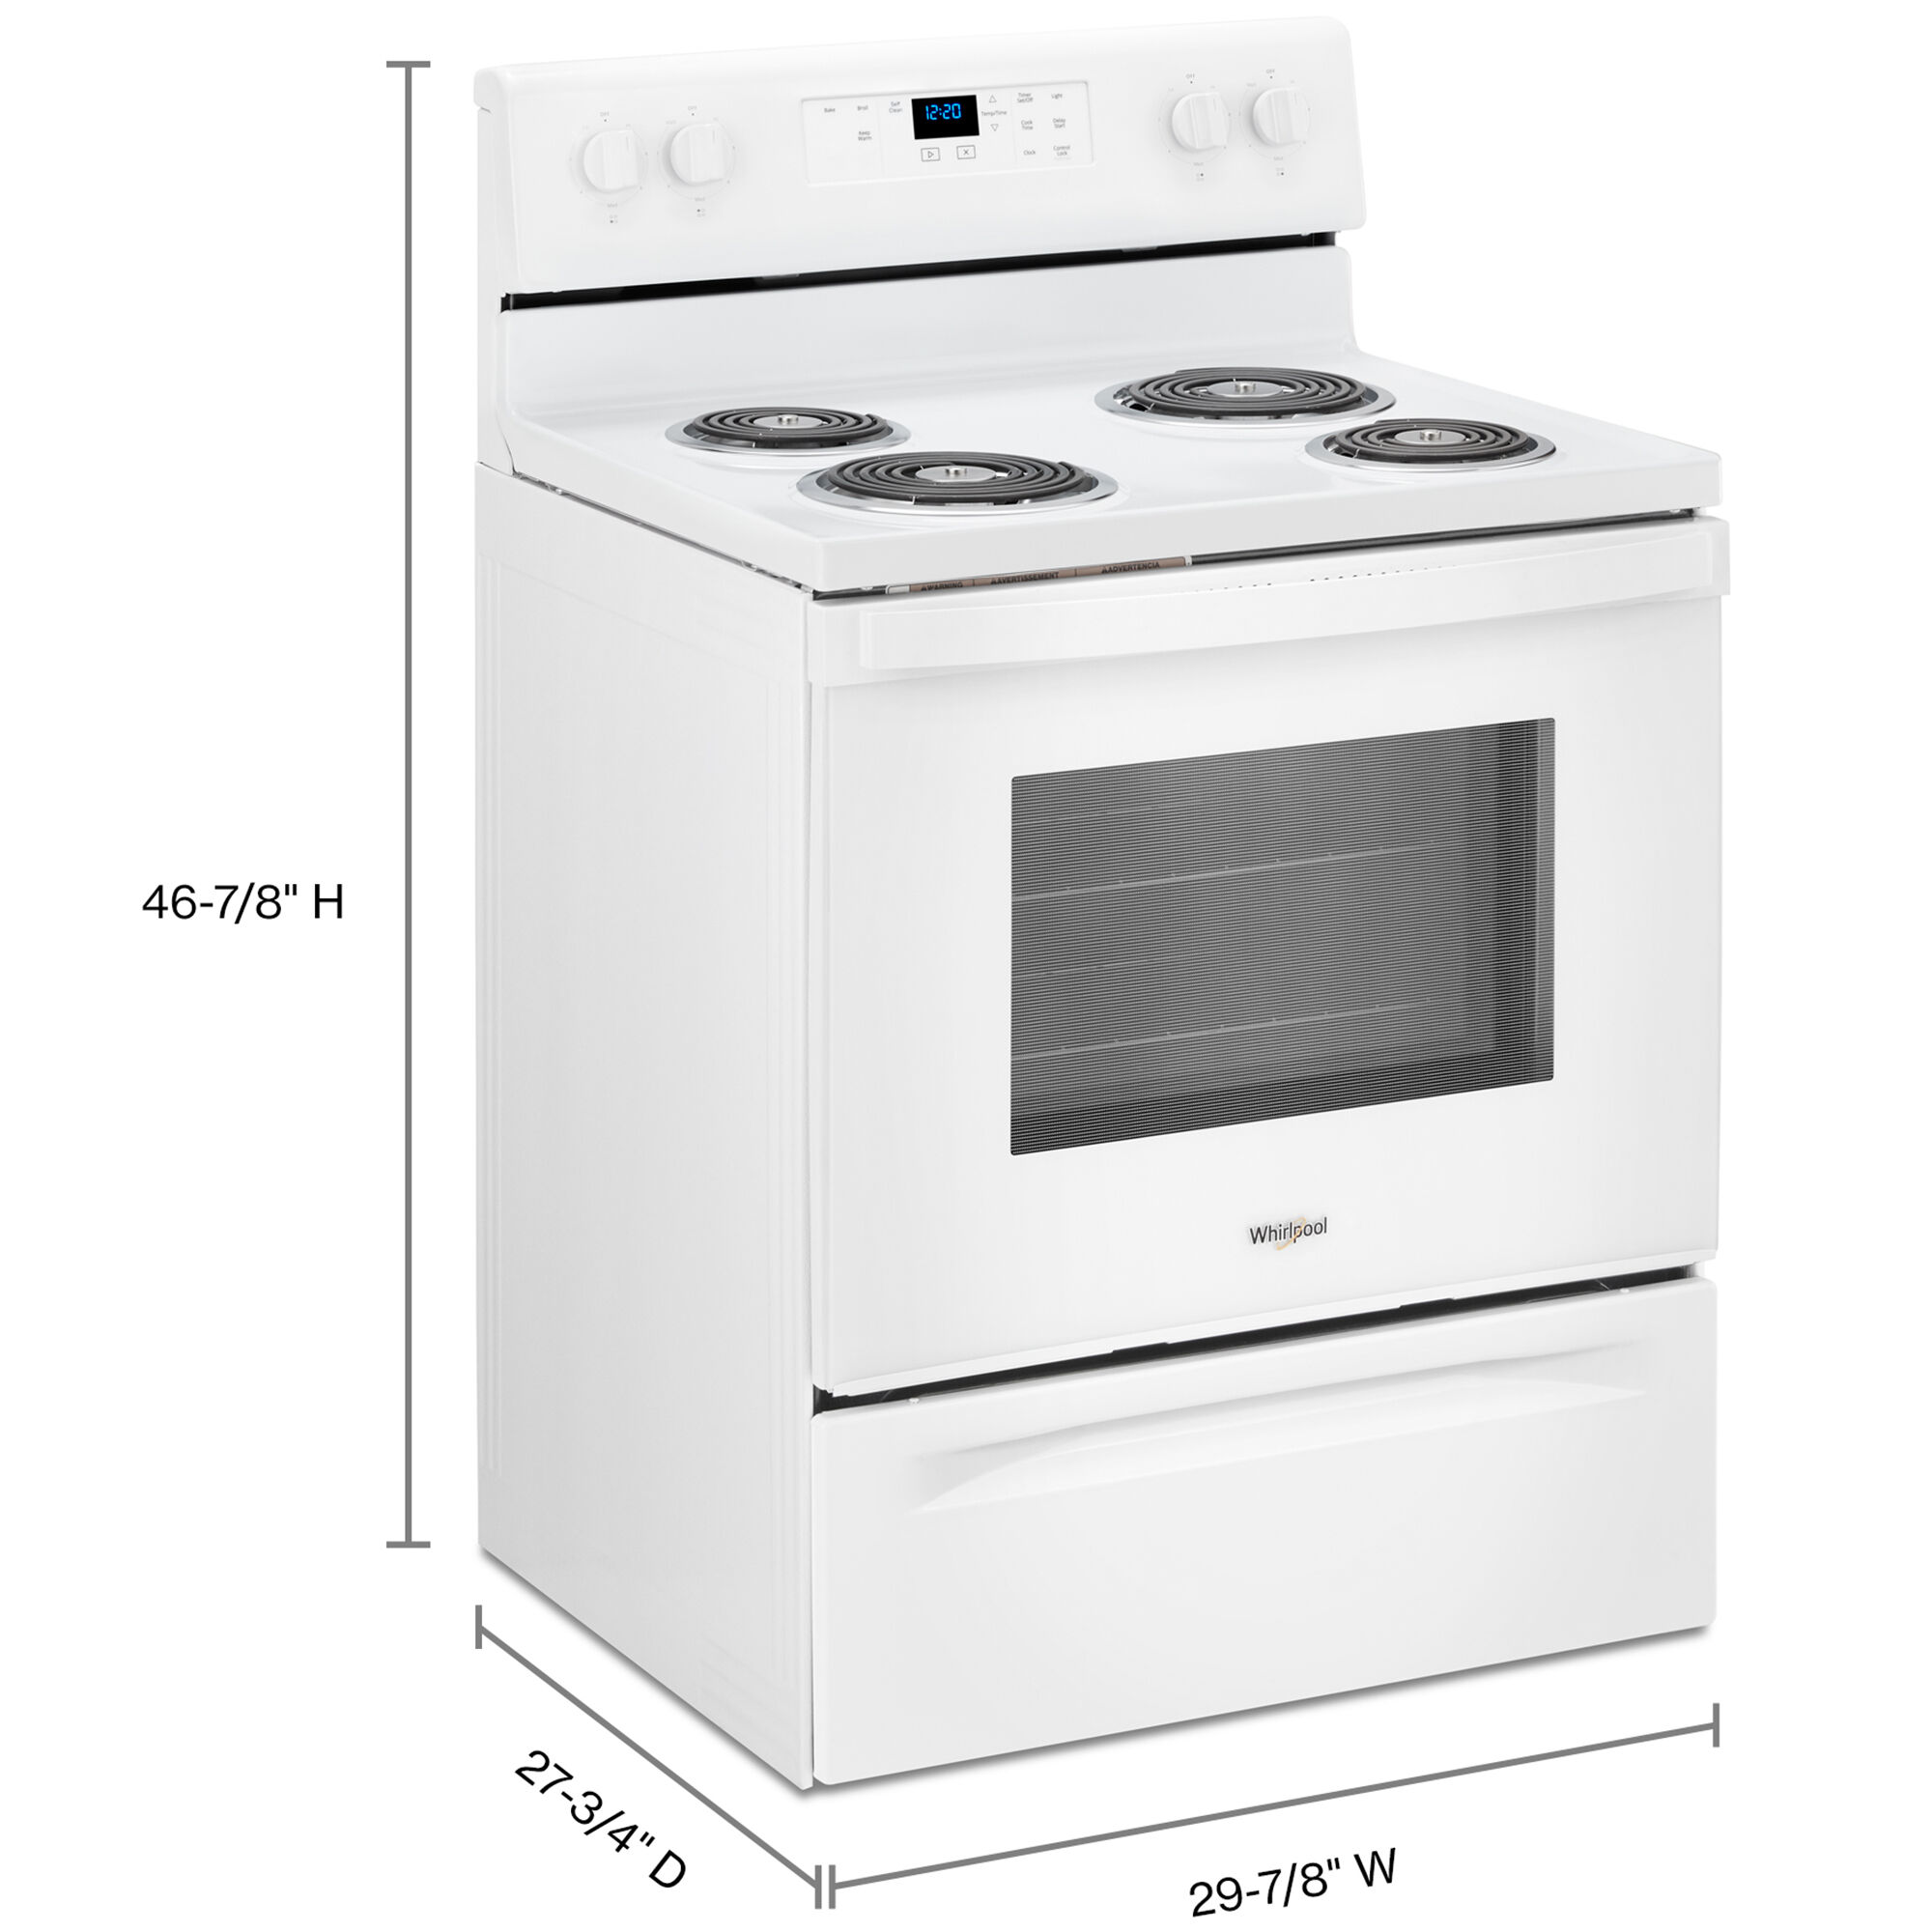 Whirlpool 30inch Freestanding Electric Range with 4 Coil Burners, 4.8 Cu.  Ft. Single Oven & Storage Drawer - White